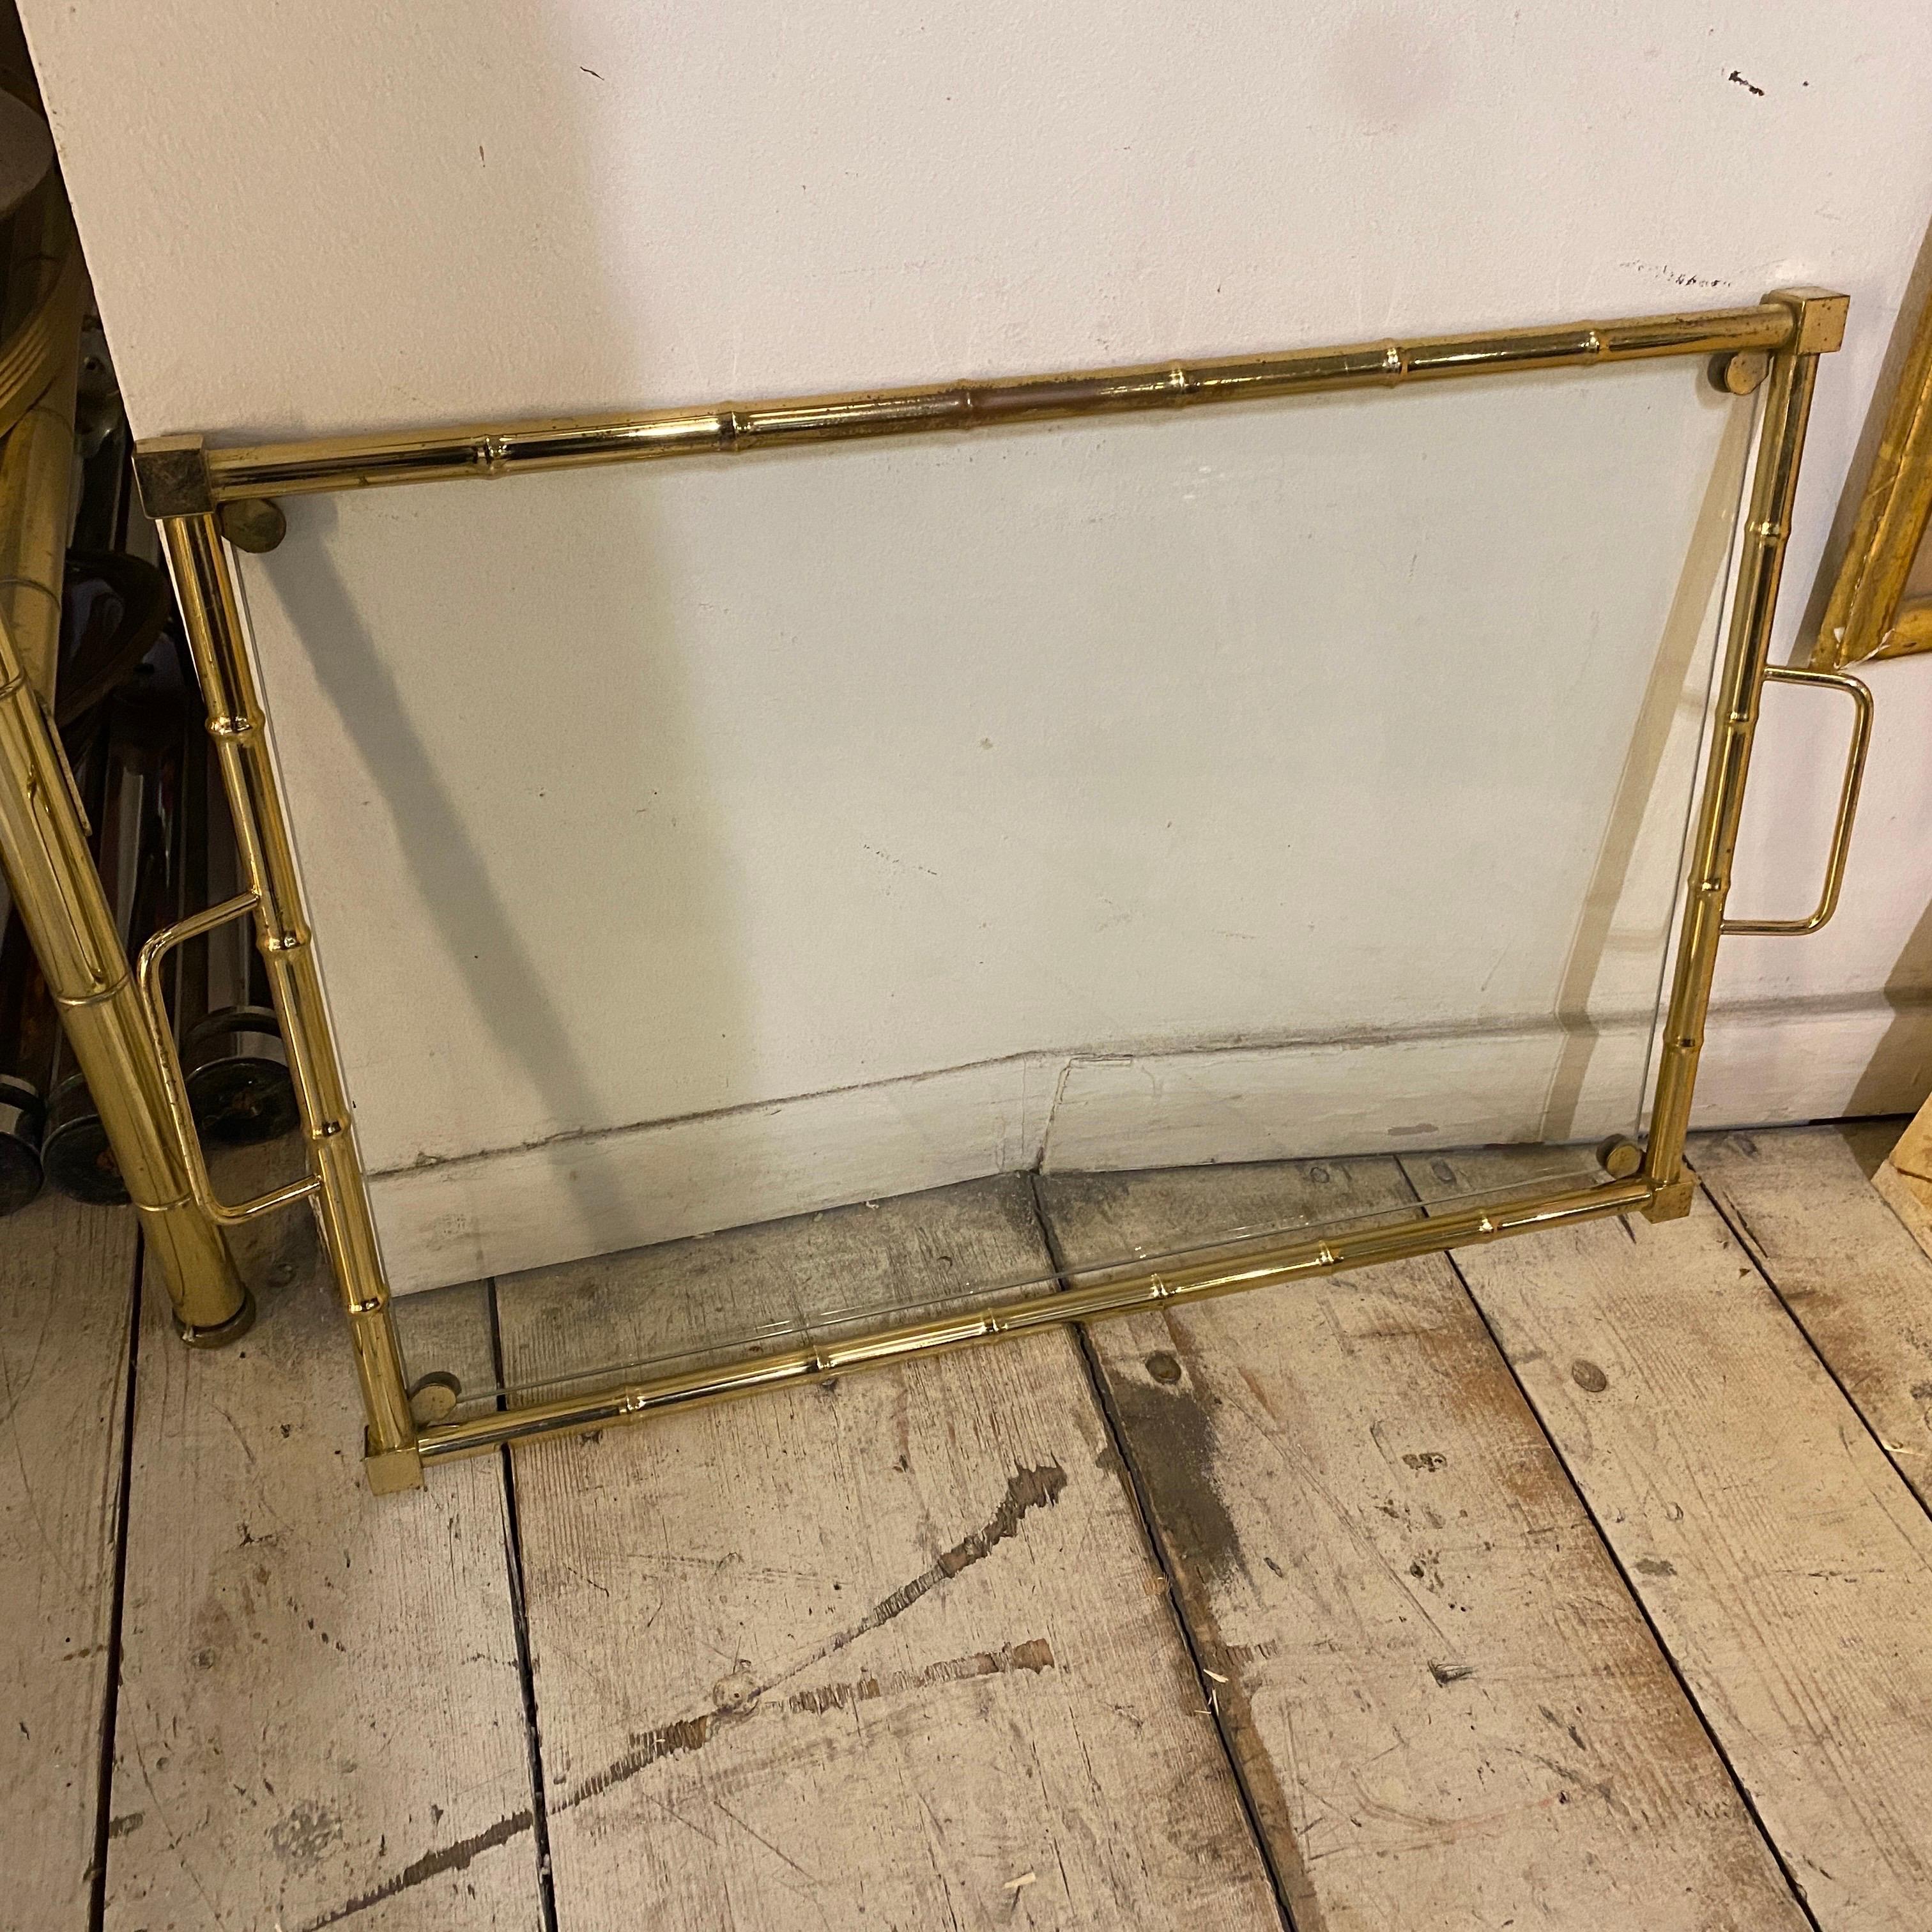 A rectangular fake bamboo brass and glass serving tray designed and manufactured in Italy in the Seventies, it's in good conditions overall. This Italian Serving Tray is a stylish and functional accessory that embodies the design ethos of its era